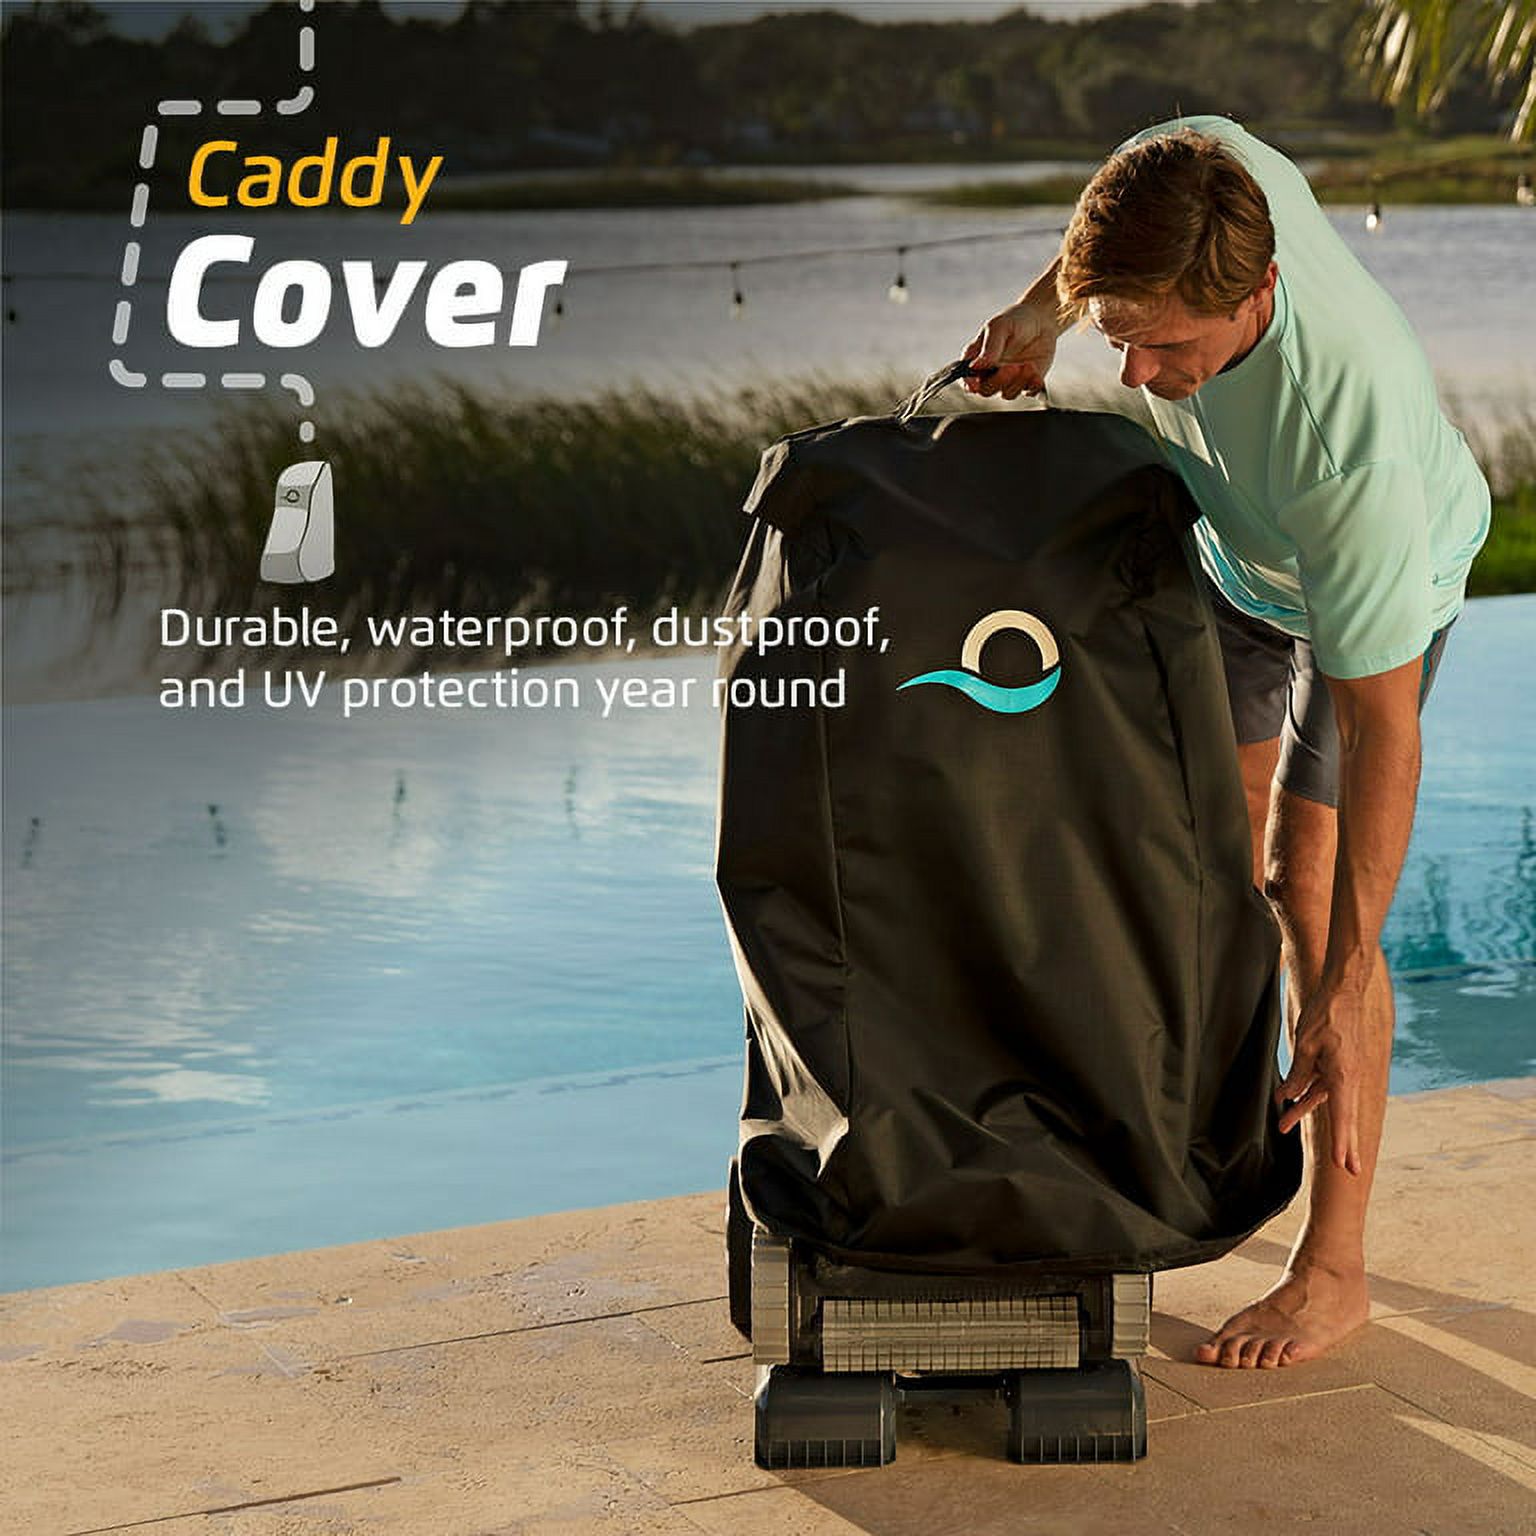 Nautilus CC Supreme Robotic Pool Vacuum Cleaner Caddy and Caddy Cover - image 4 of 5